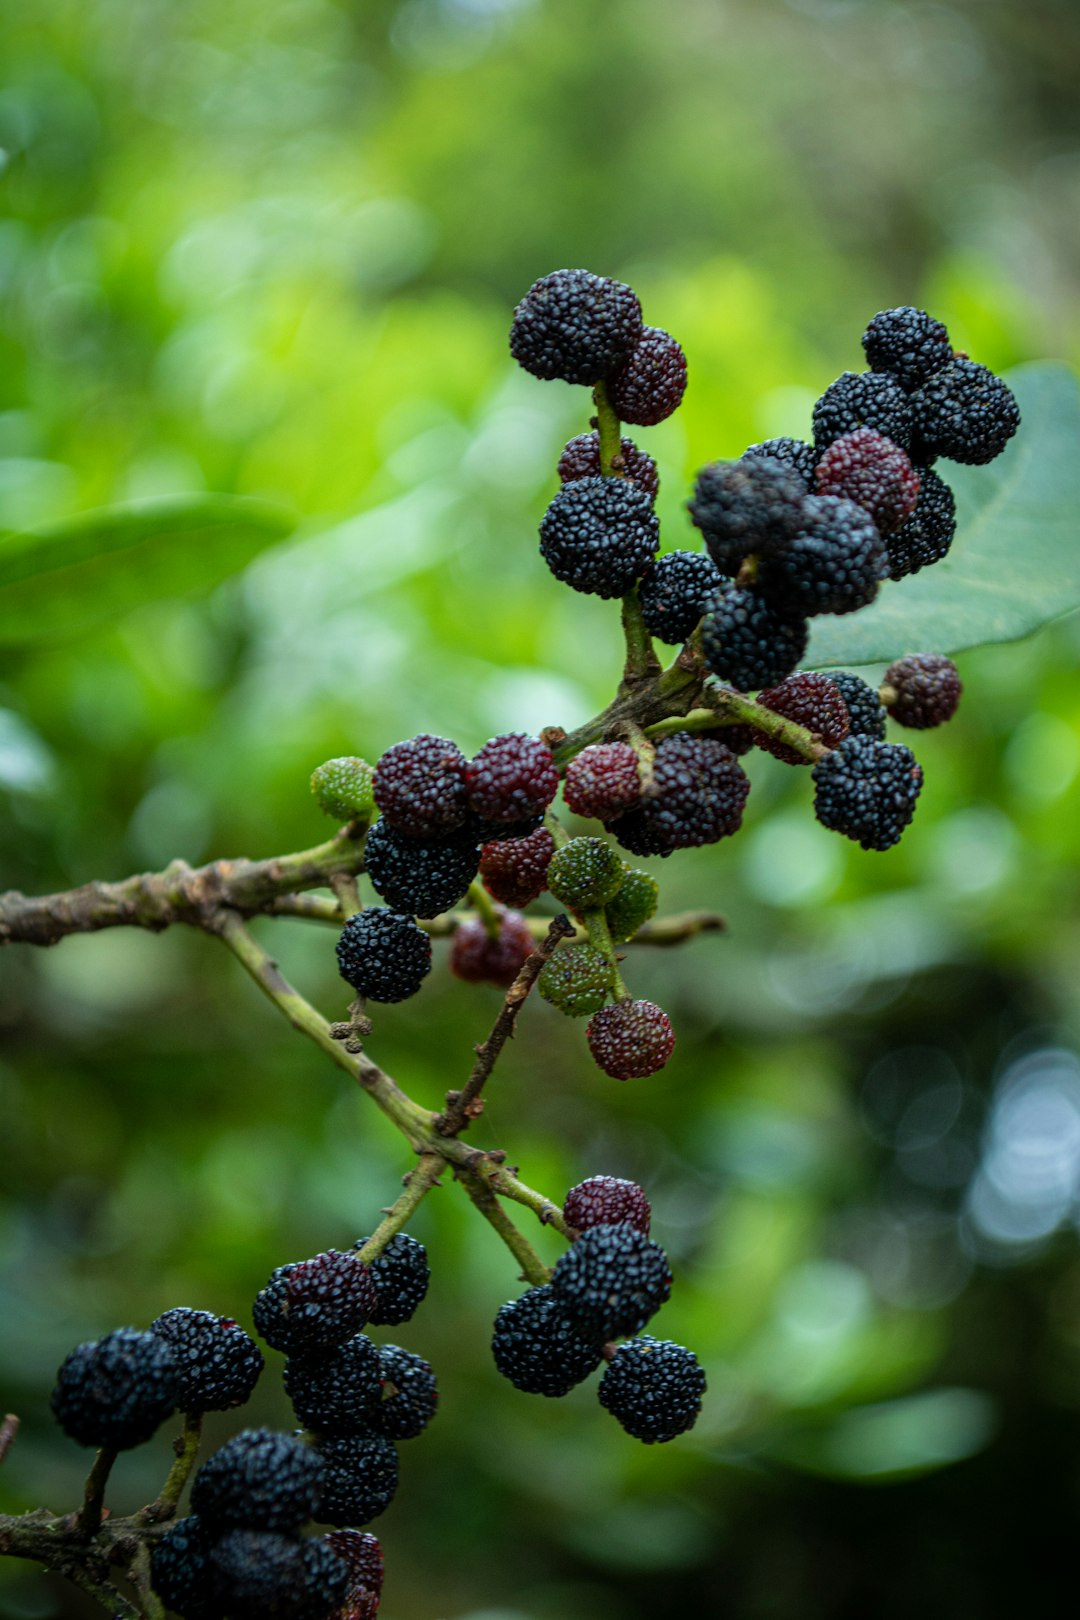 Waxberries in the forests of Tenerife.